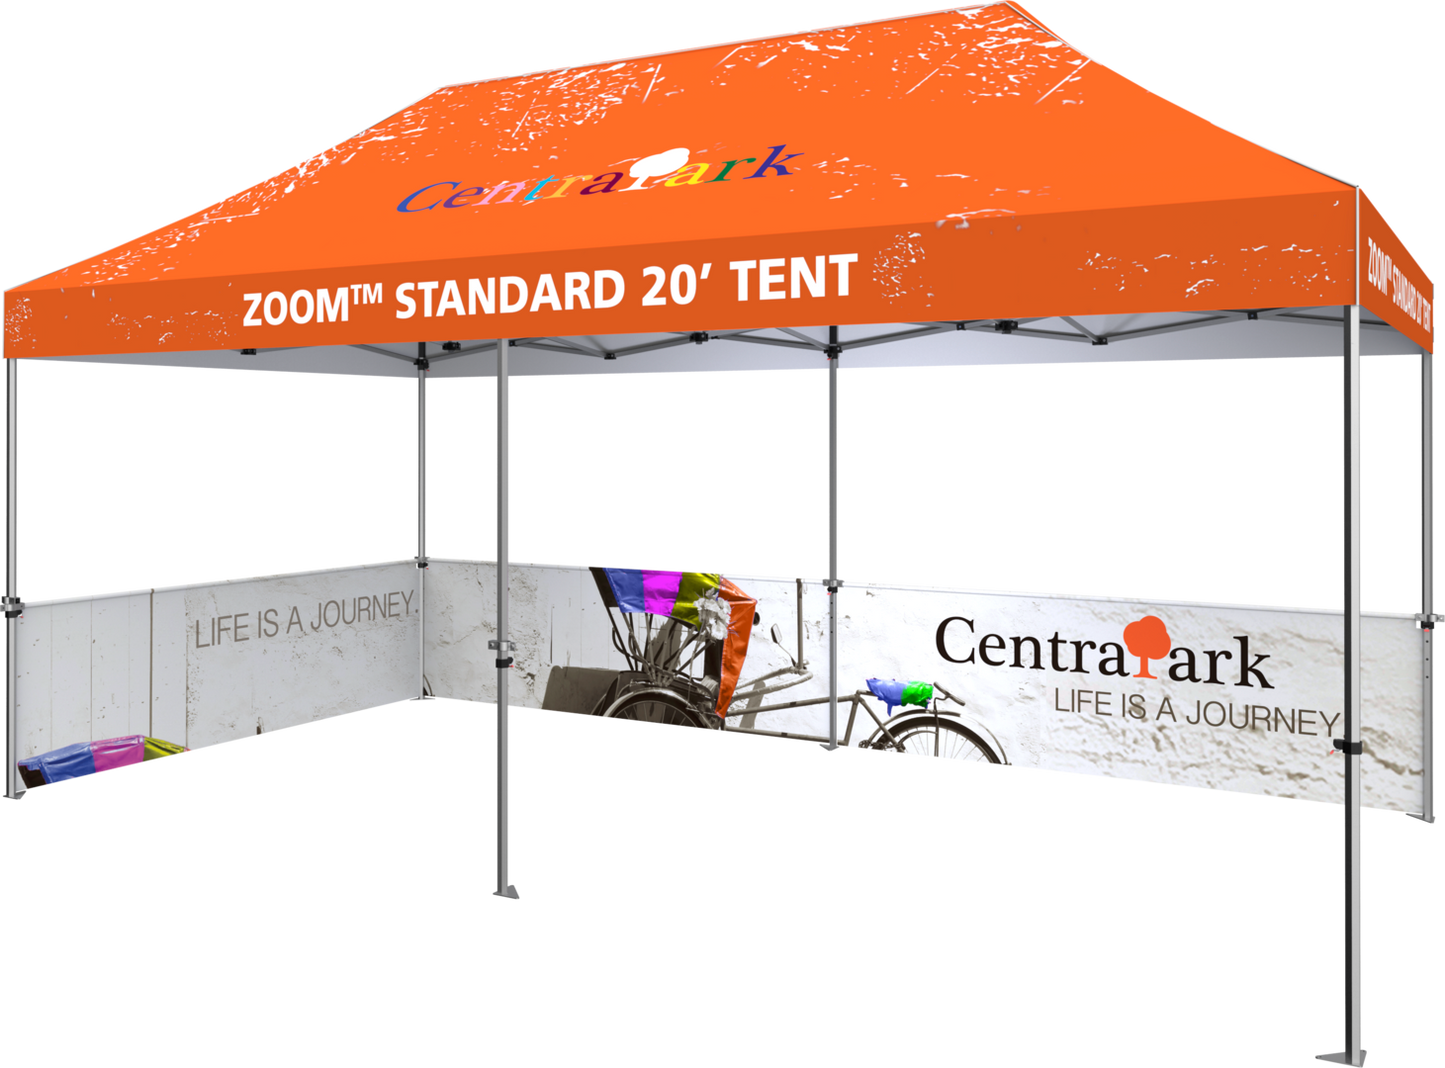 20ft x 10ft Zoom Standard Popup Tent Half Wall Custom Printed Double-Sided (Half Wall Graphic Only)